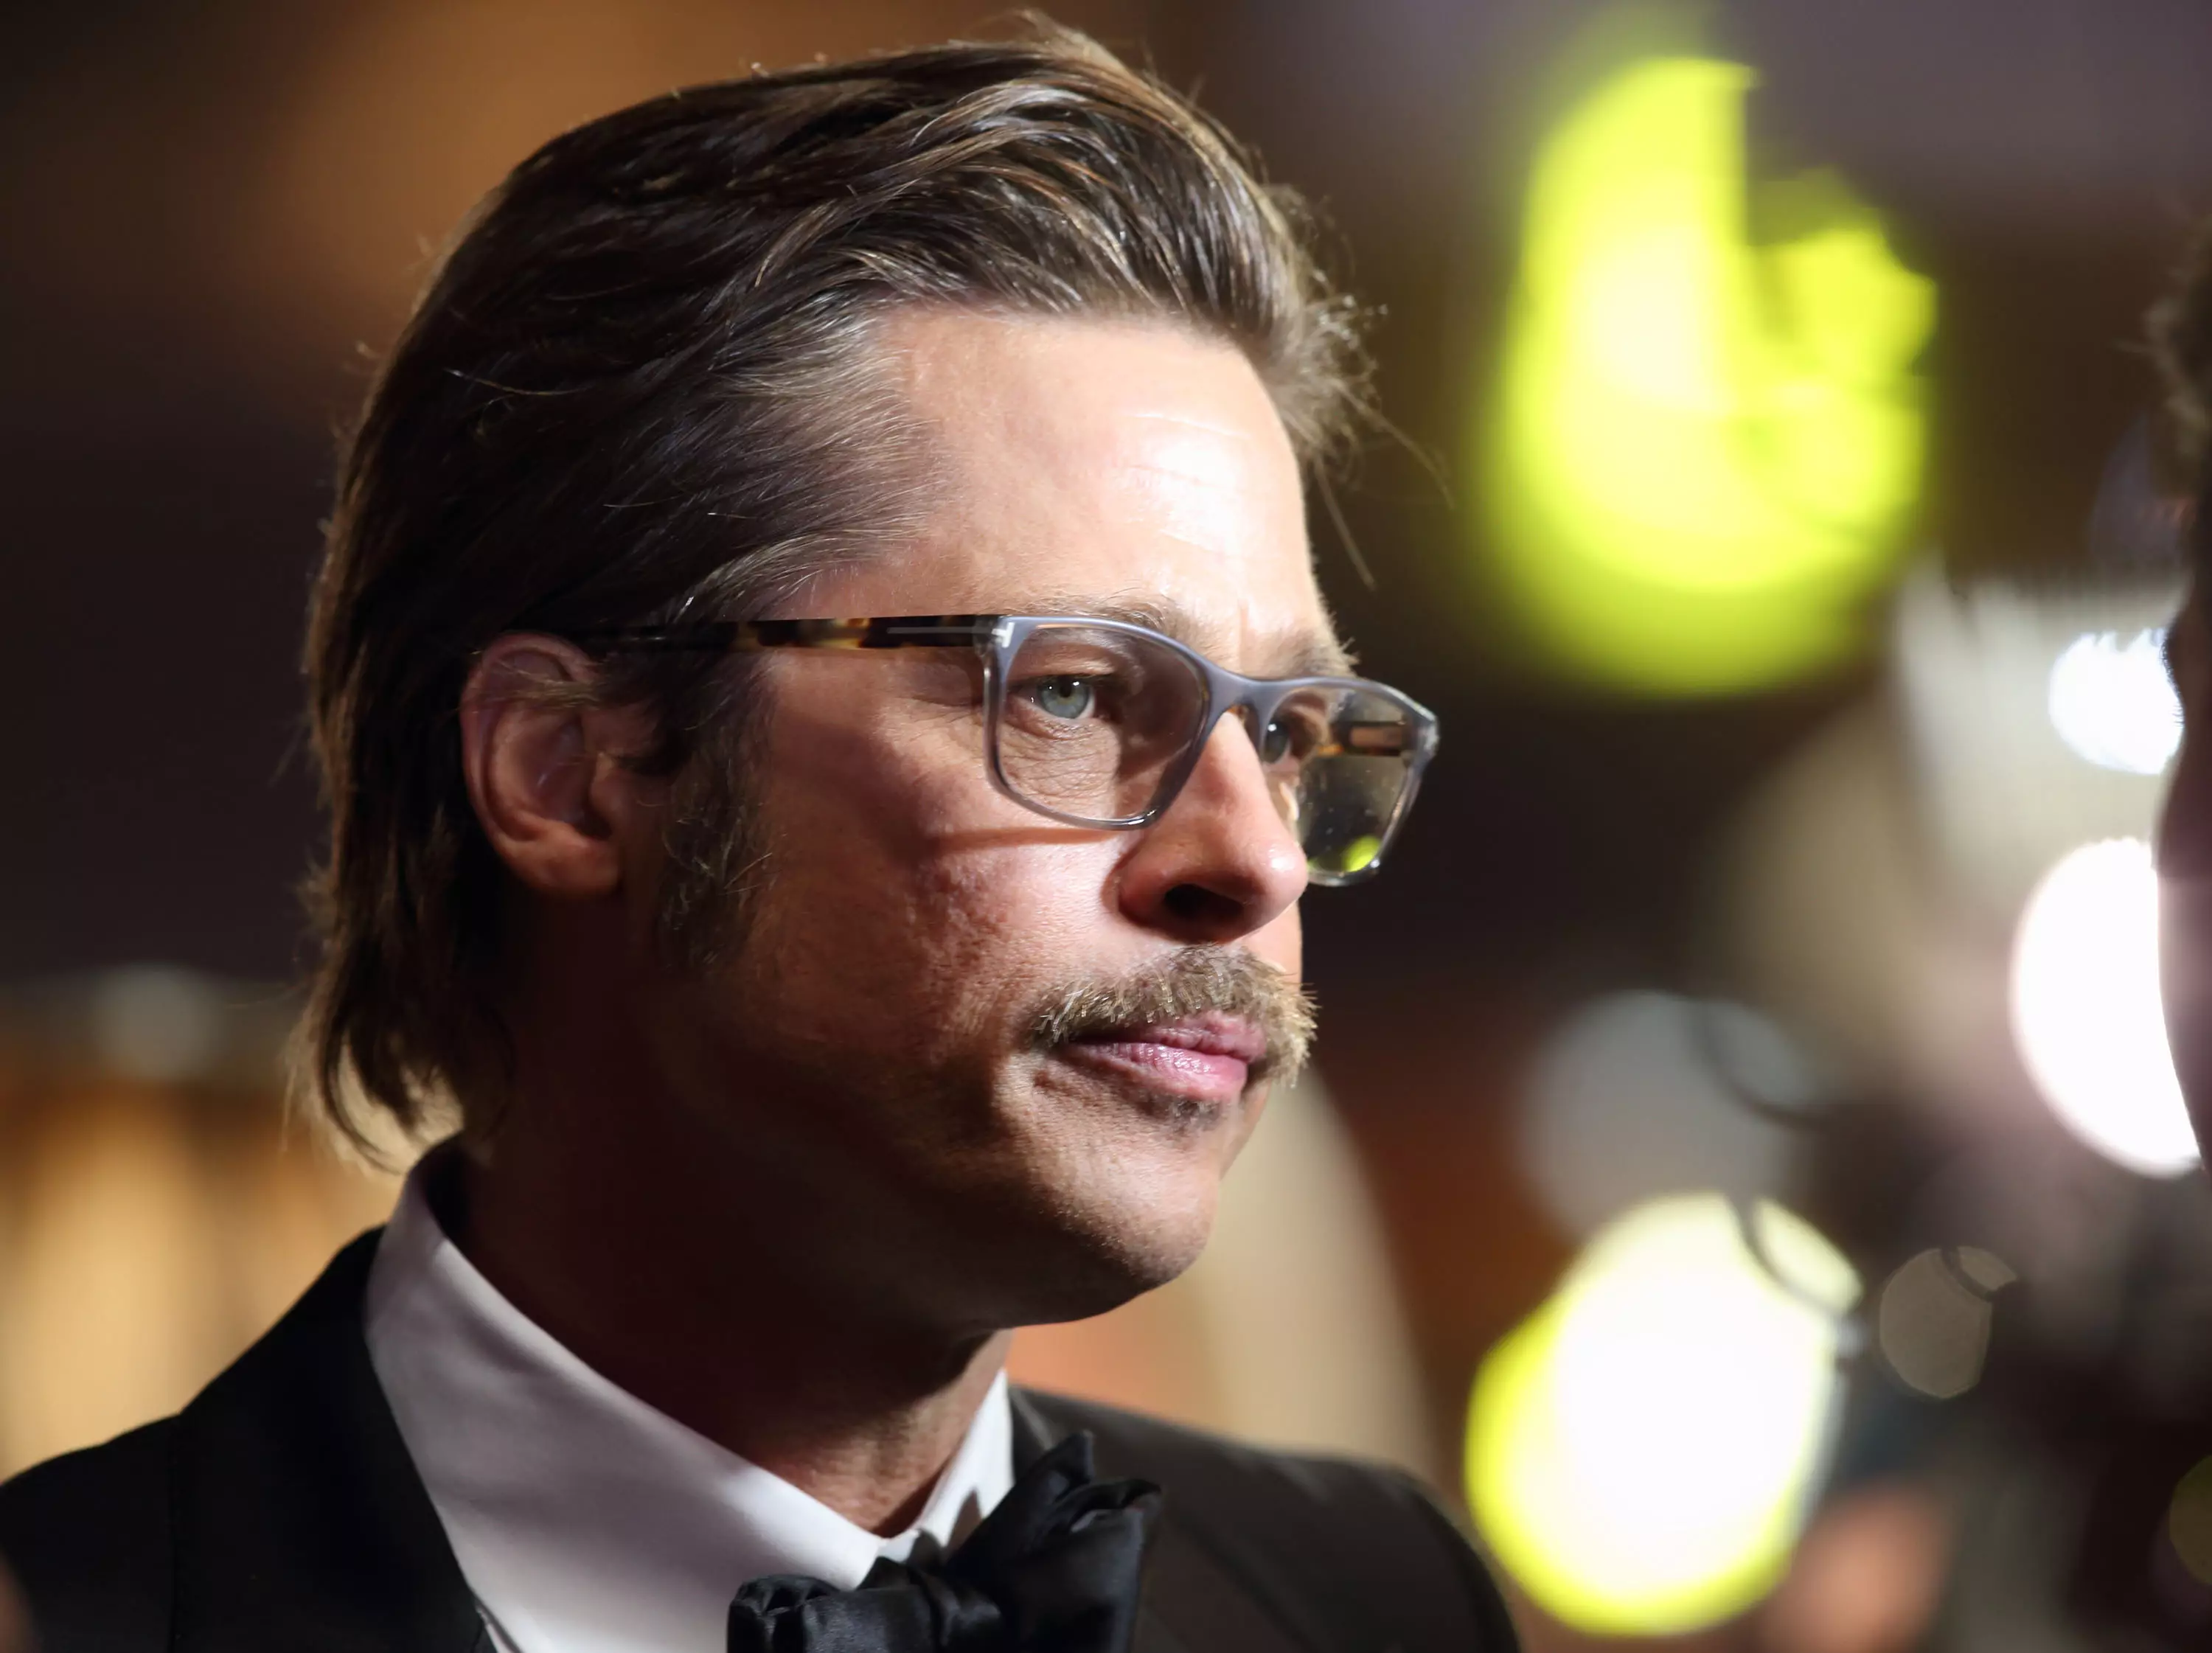 Brad Pitt Saves Young Fan From Being Crushed In Crowd